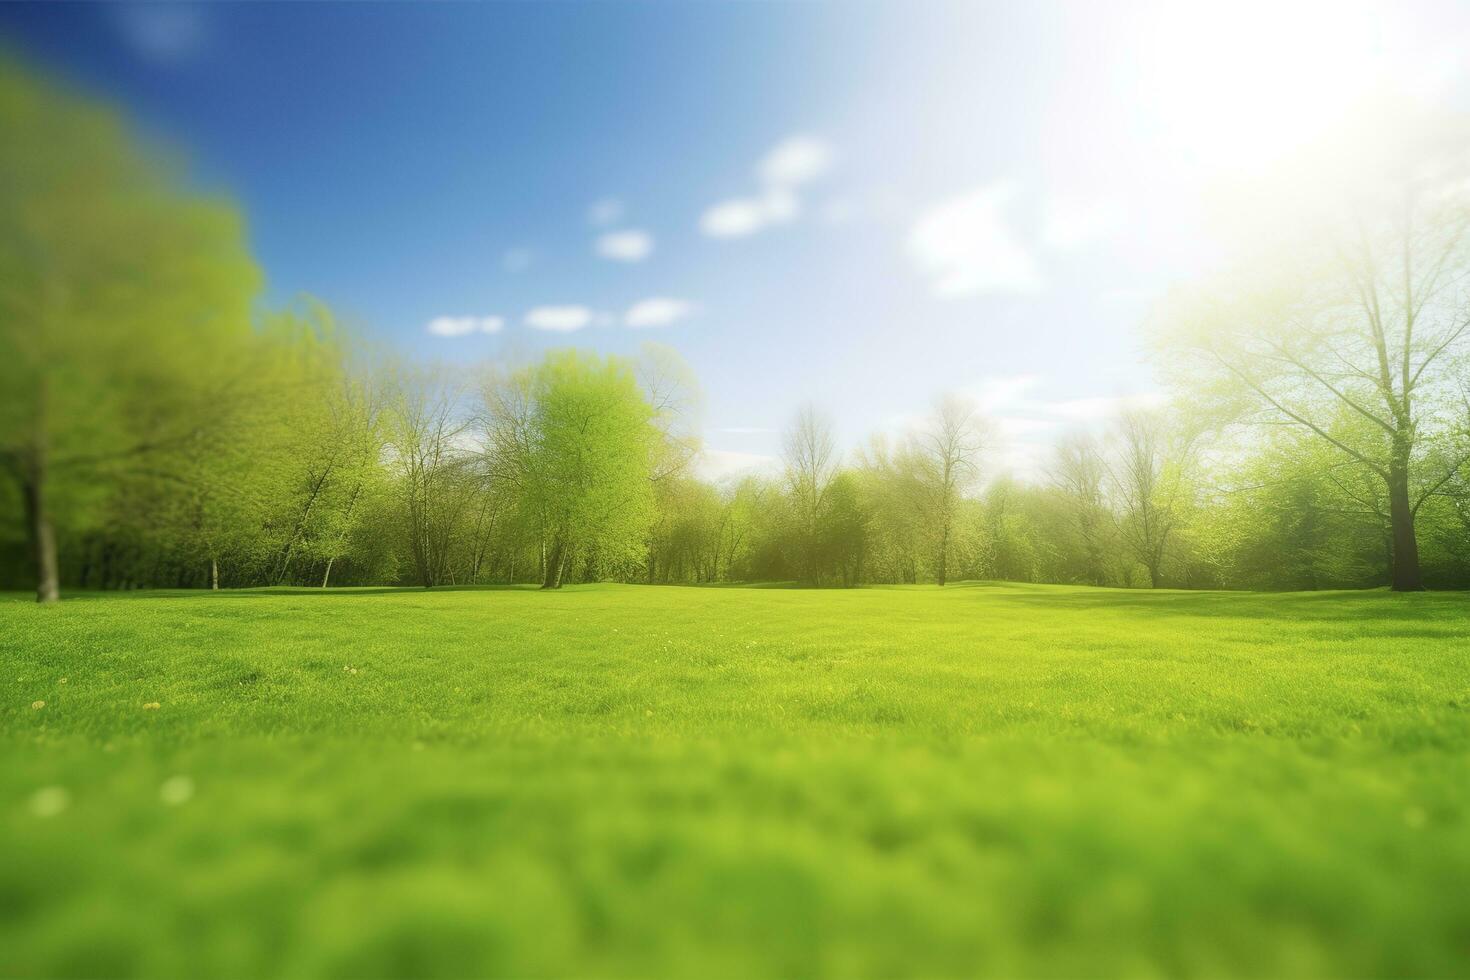 Beautiful blurred background image of spring nature with a neatly trimmed lawn surrounded by trees against a blue sky with clouds on a bright sunny day, generate ai photo